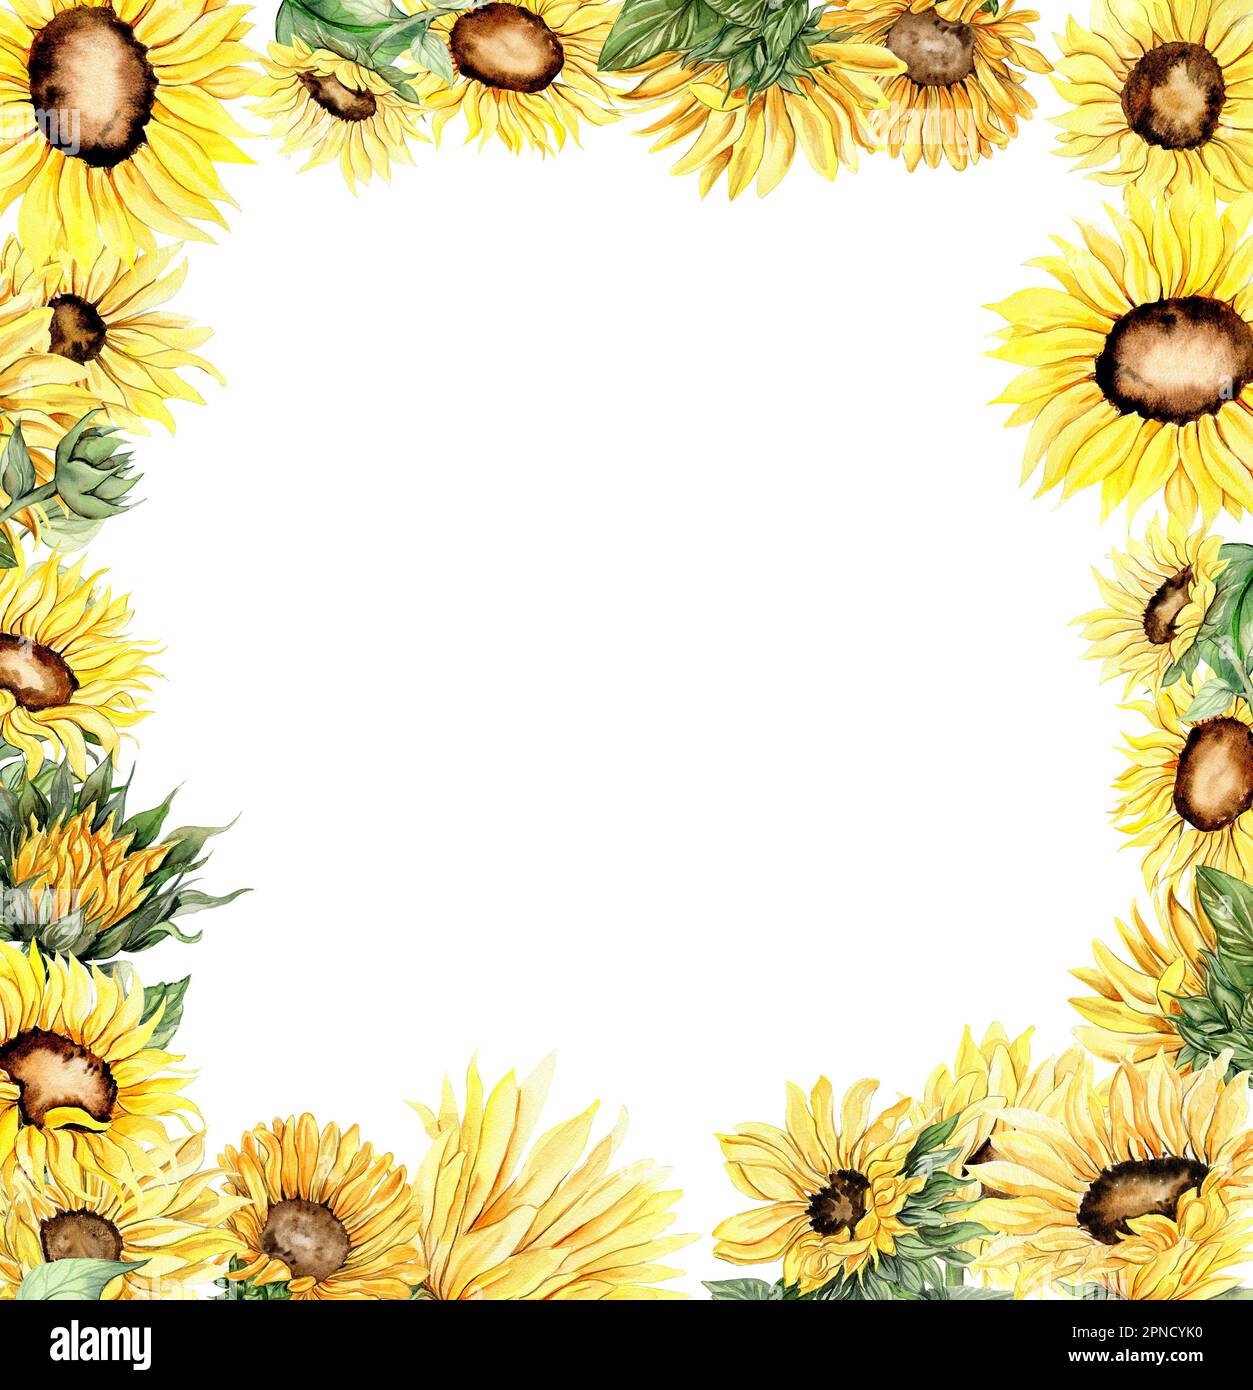 Watercolor hand drawn spring garden full of sunflowers square frame . Watercolor illustration for scrapbooking.Cartoon hand drawn background with flow Stock Photo